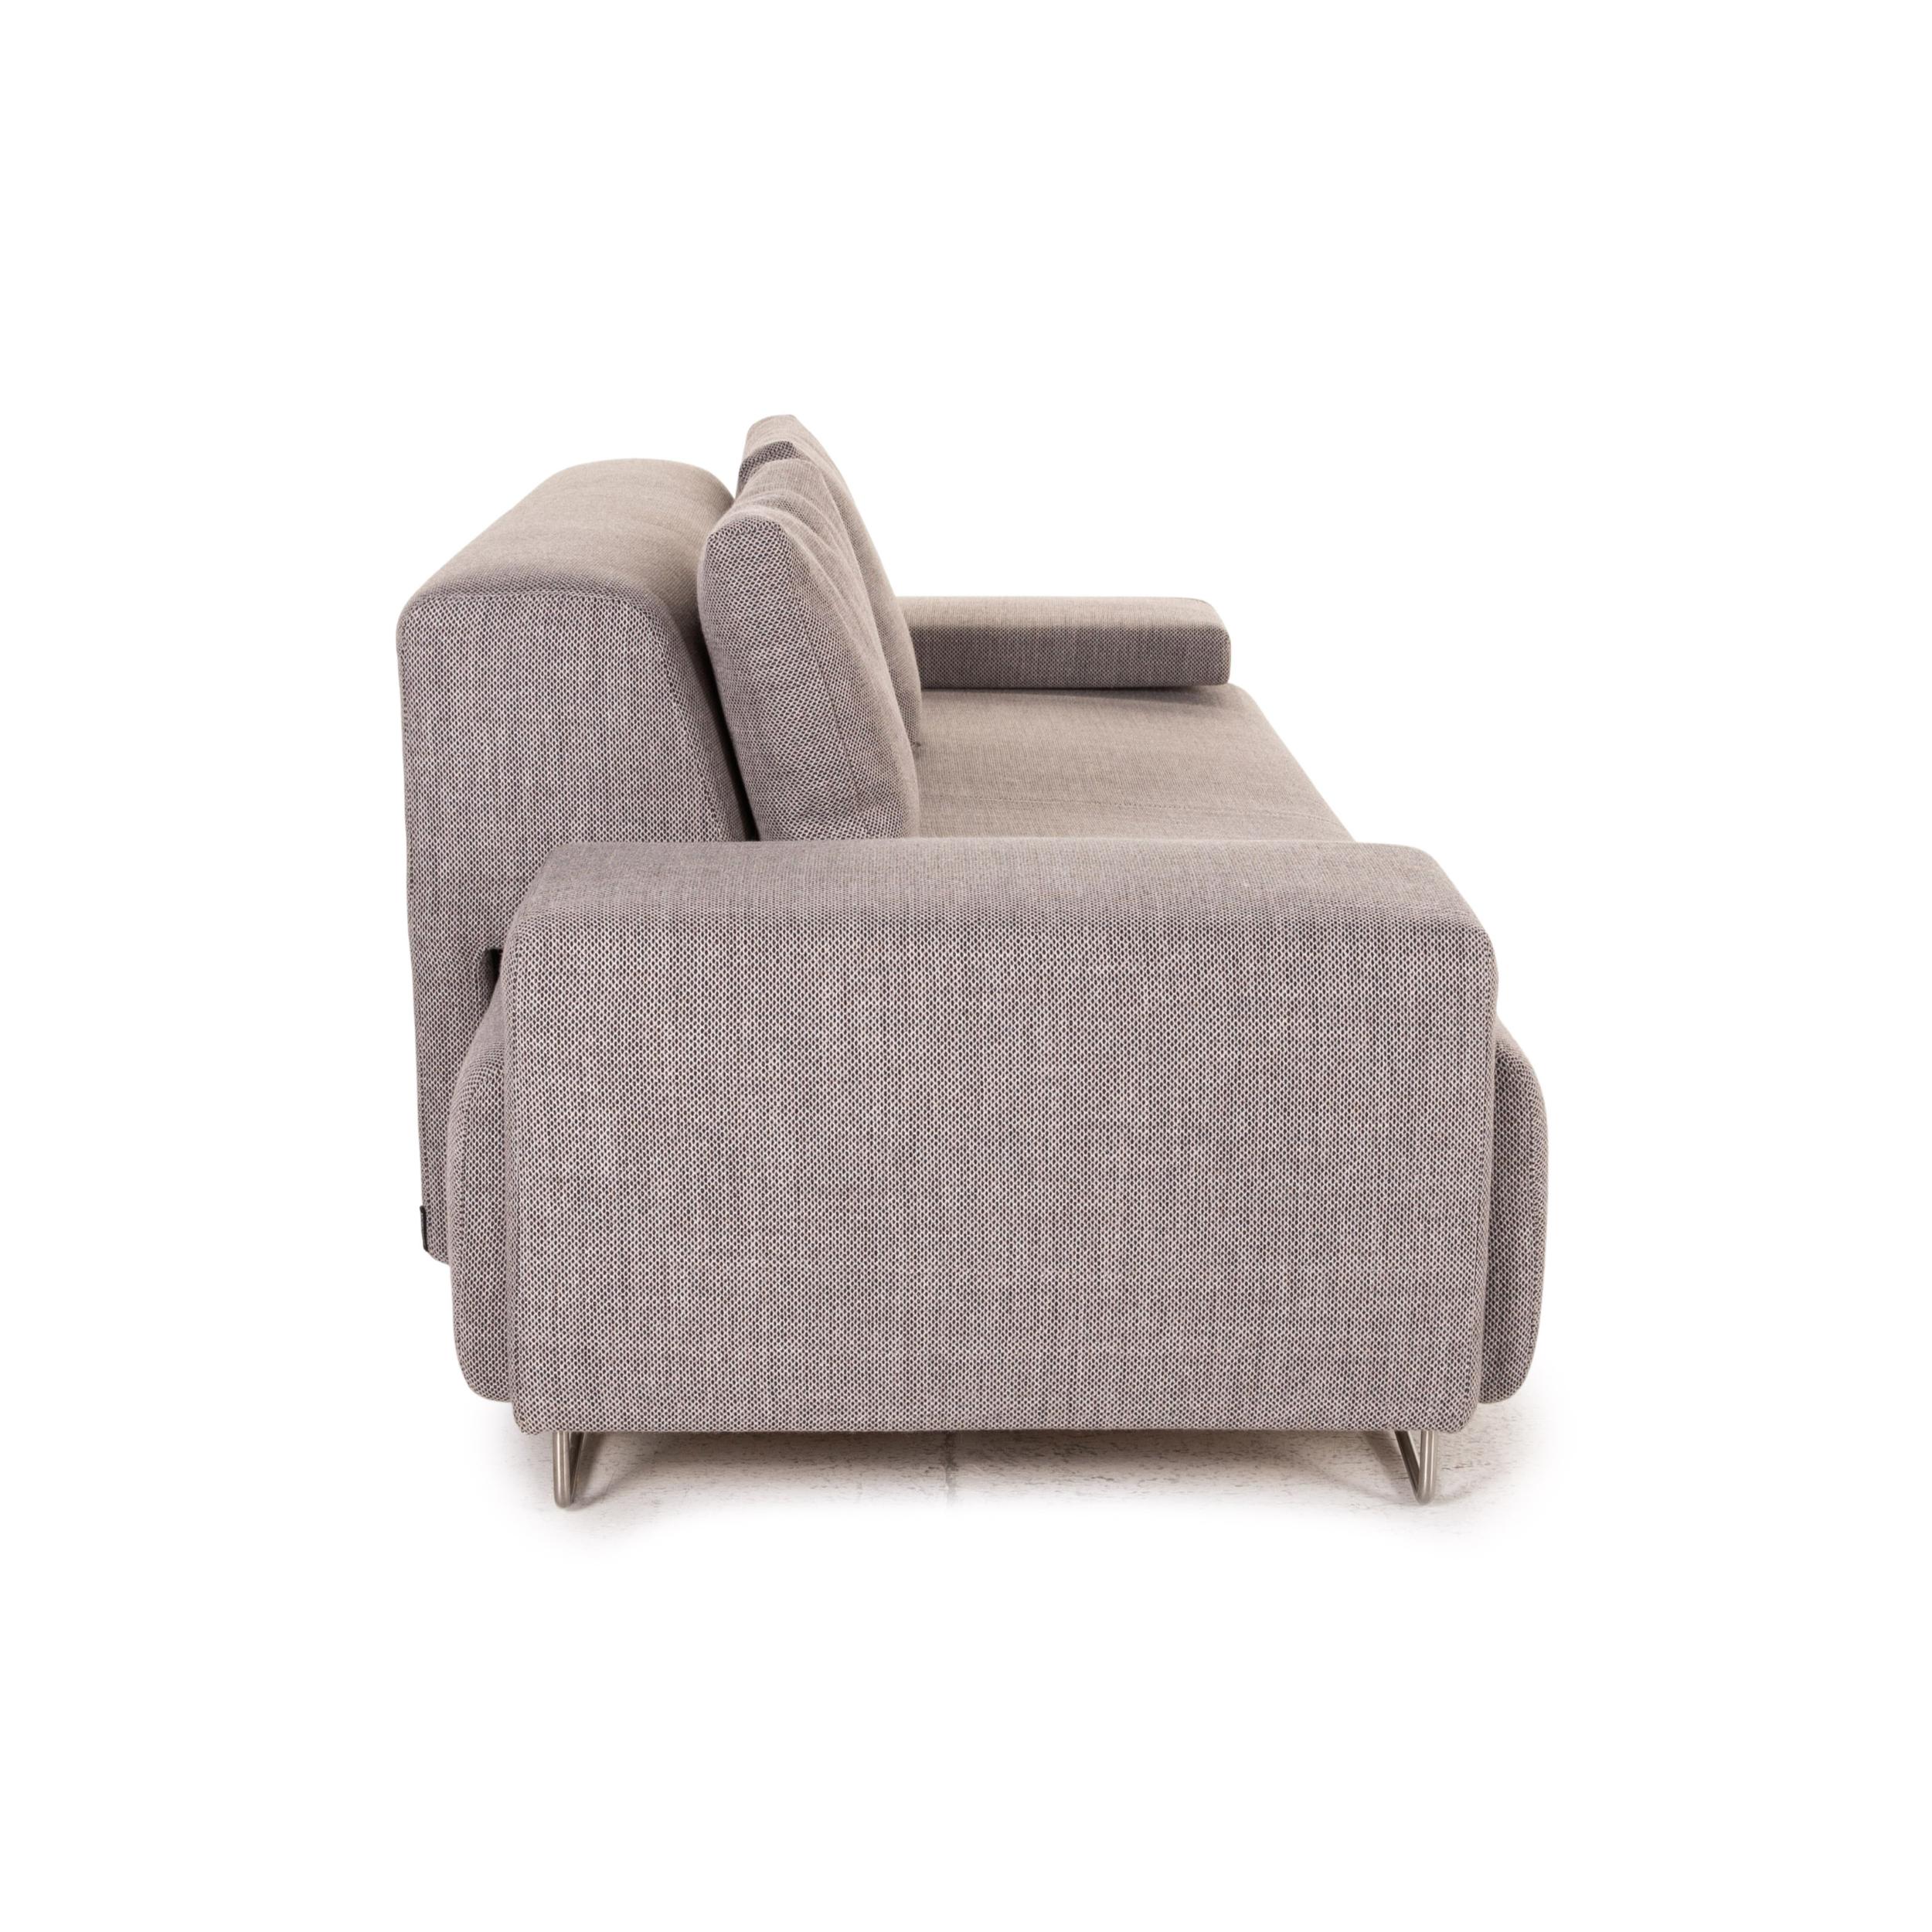 Moroso Lowland Fabric Sofa Three Seater Gray Couch For Sale 1